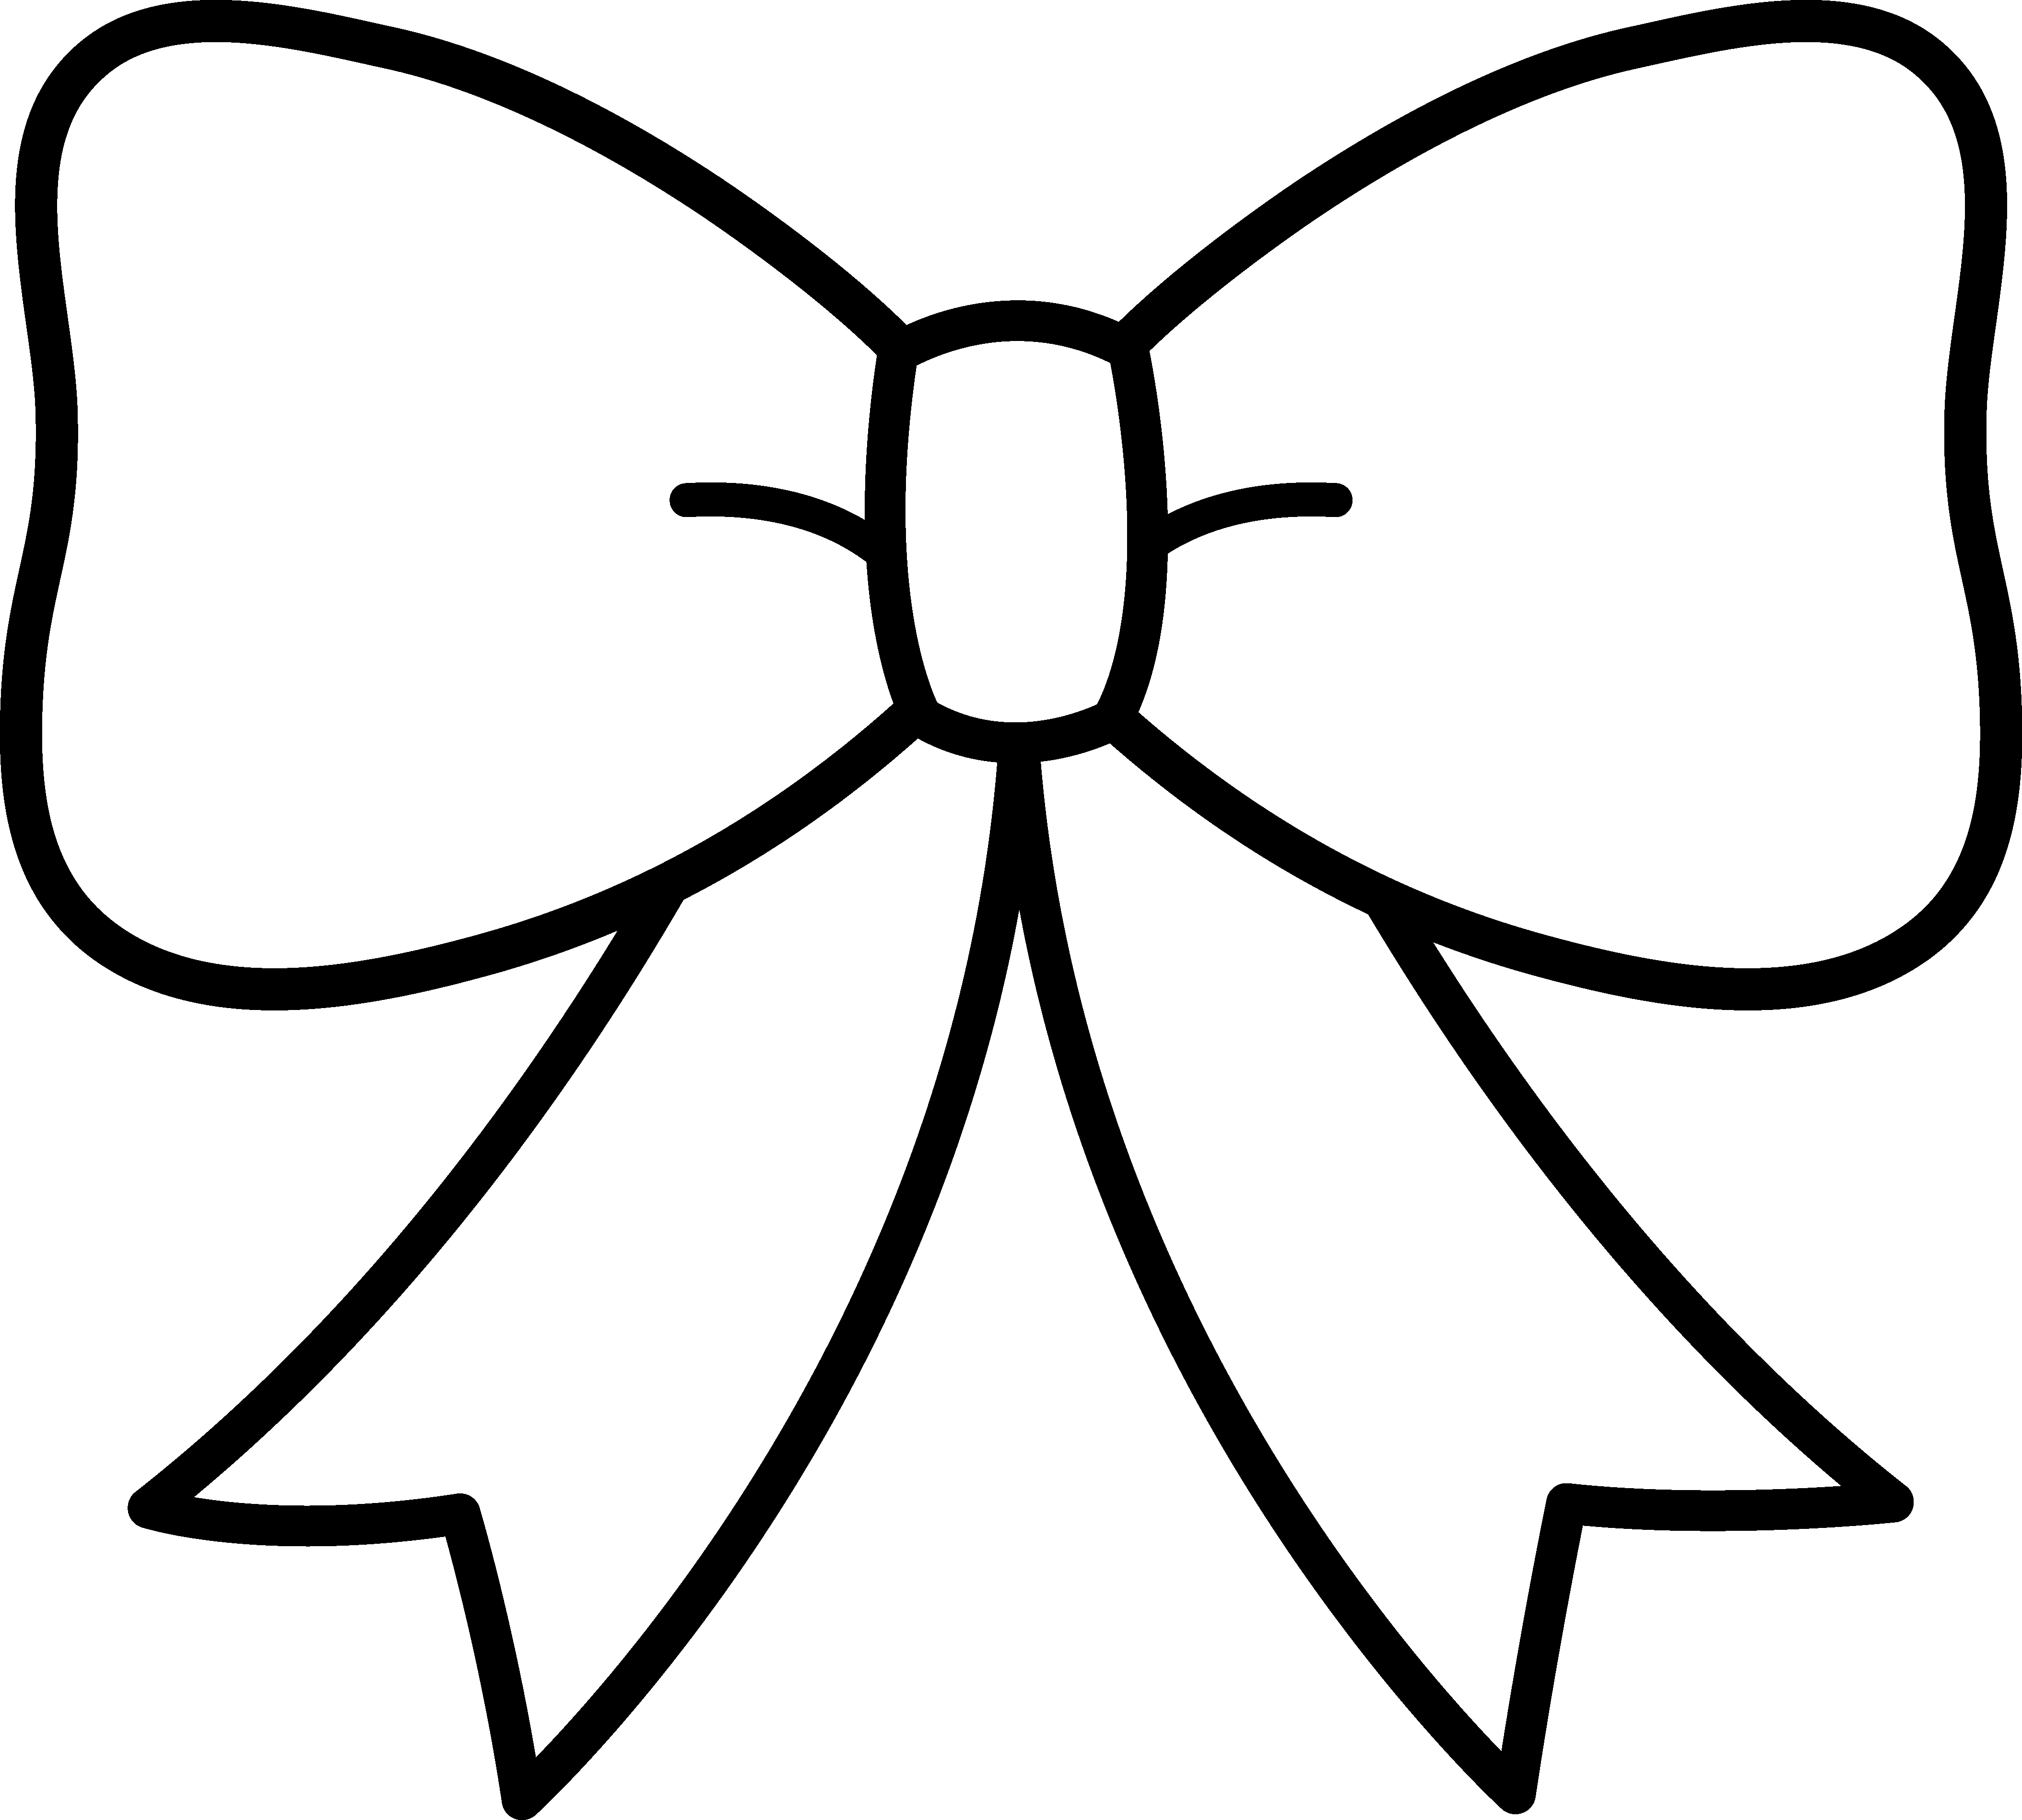 Bow black and white. Bows clipart